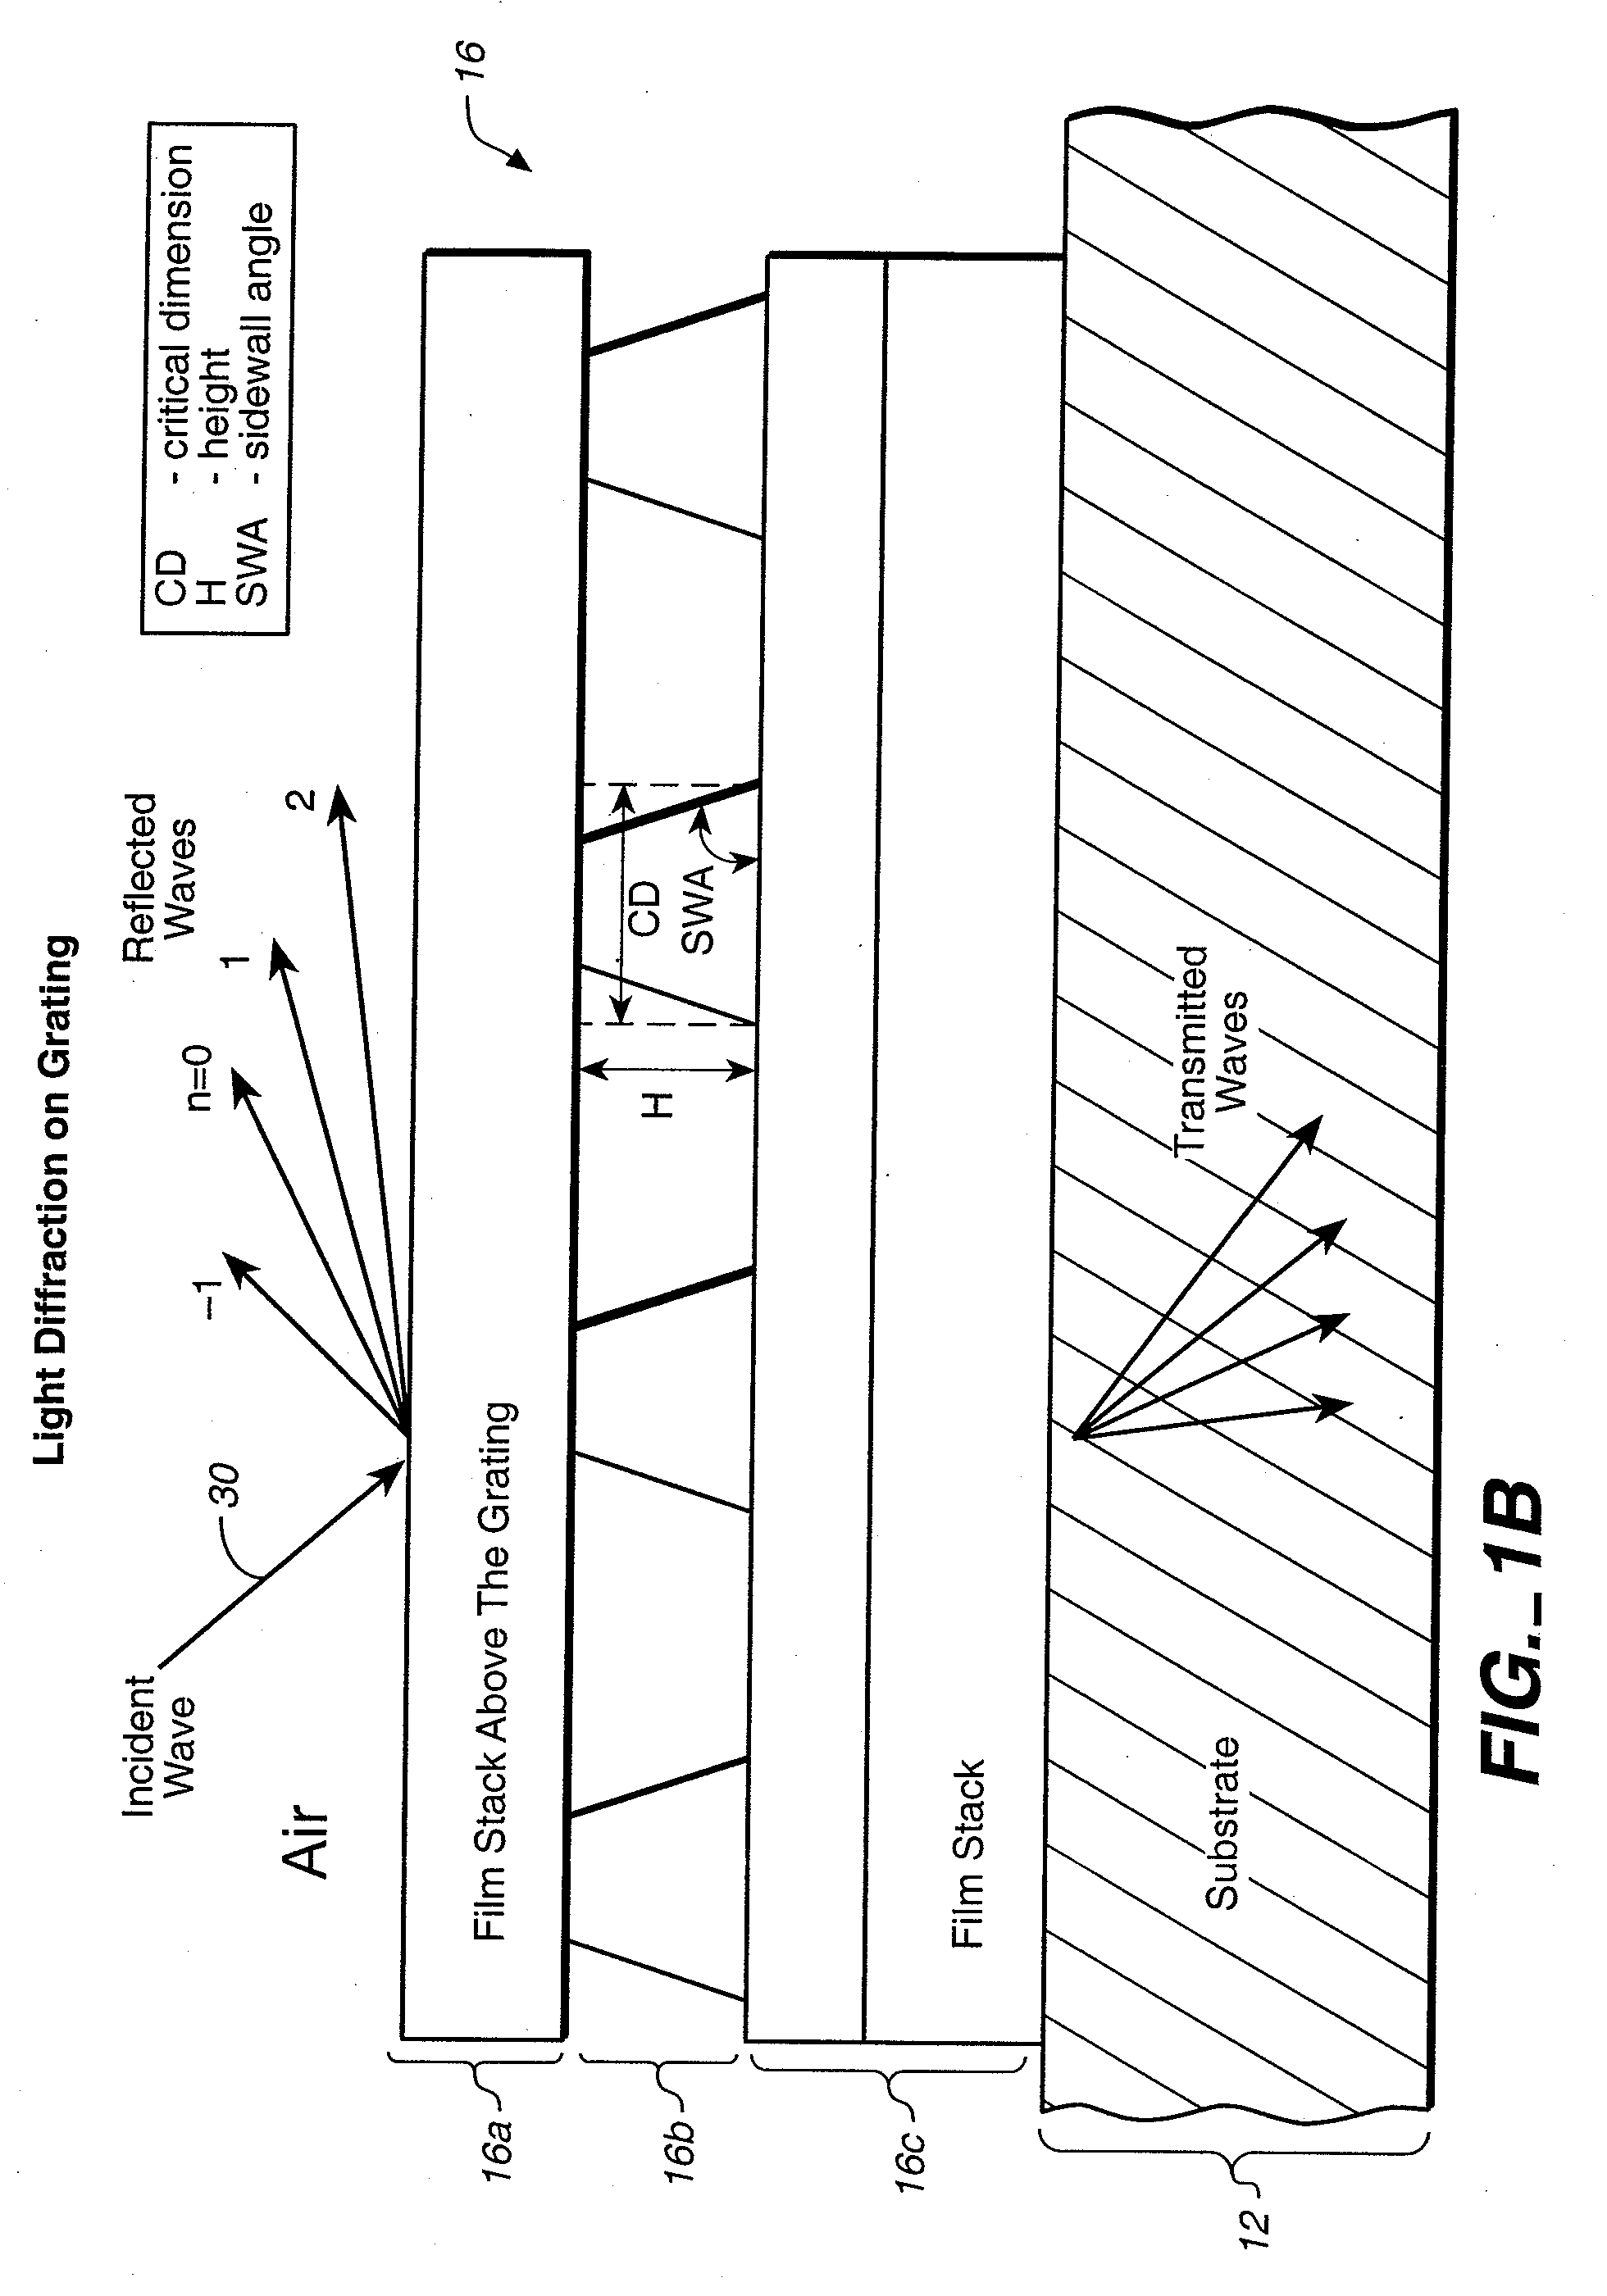 Parametric Profiling Using Optical Spectroscopic Systems